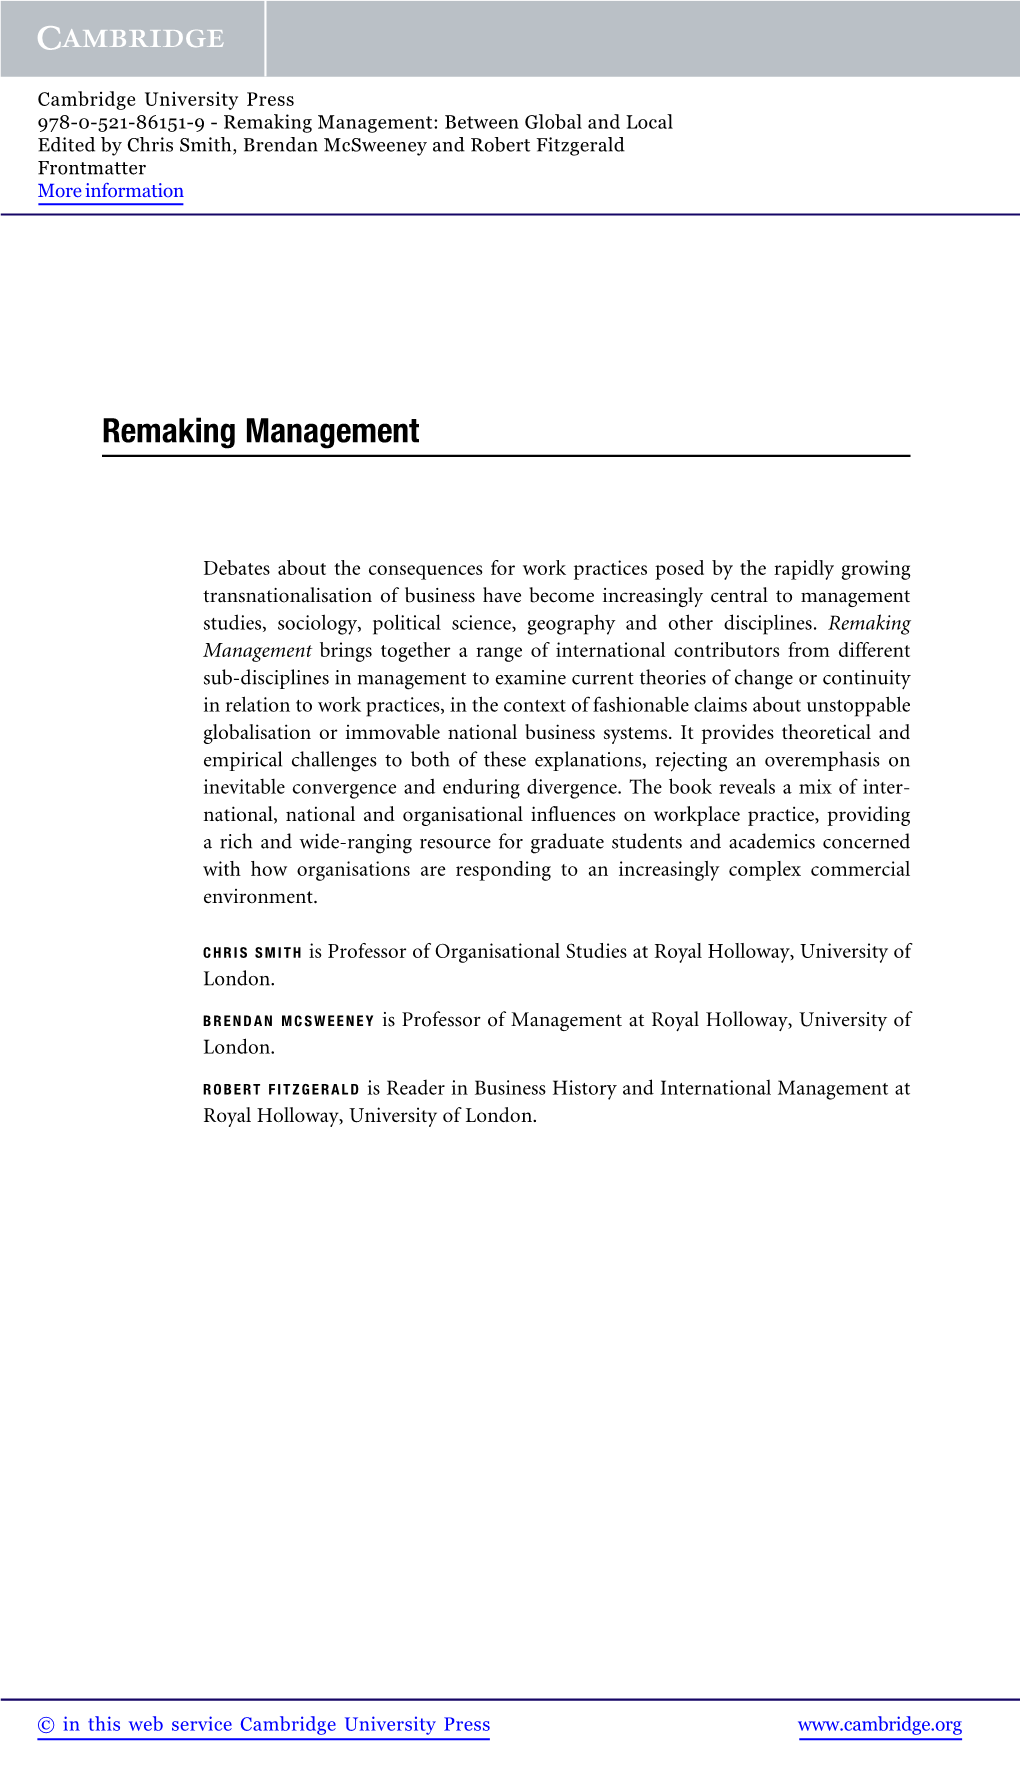 Remaking Management: Between Global and Local Edited by Chris Smith, Brendan Mcsweeney and Robert Fitzgerald Frontmatter More Information